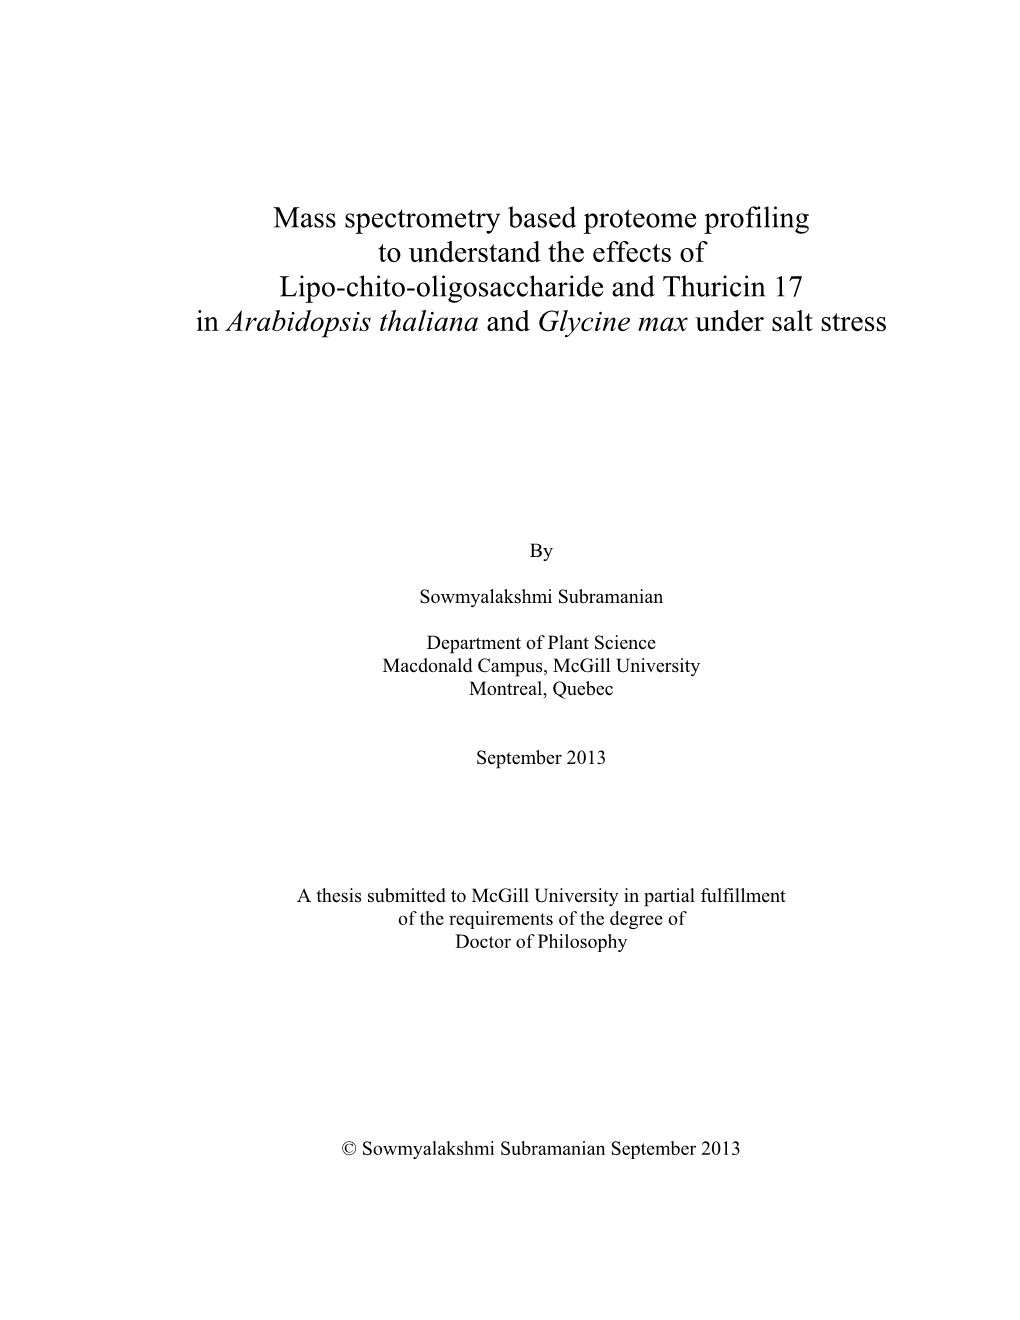 Mass Spectrometry Based Proteome Profiling to Understand the Effects Of